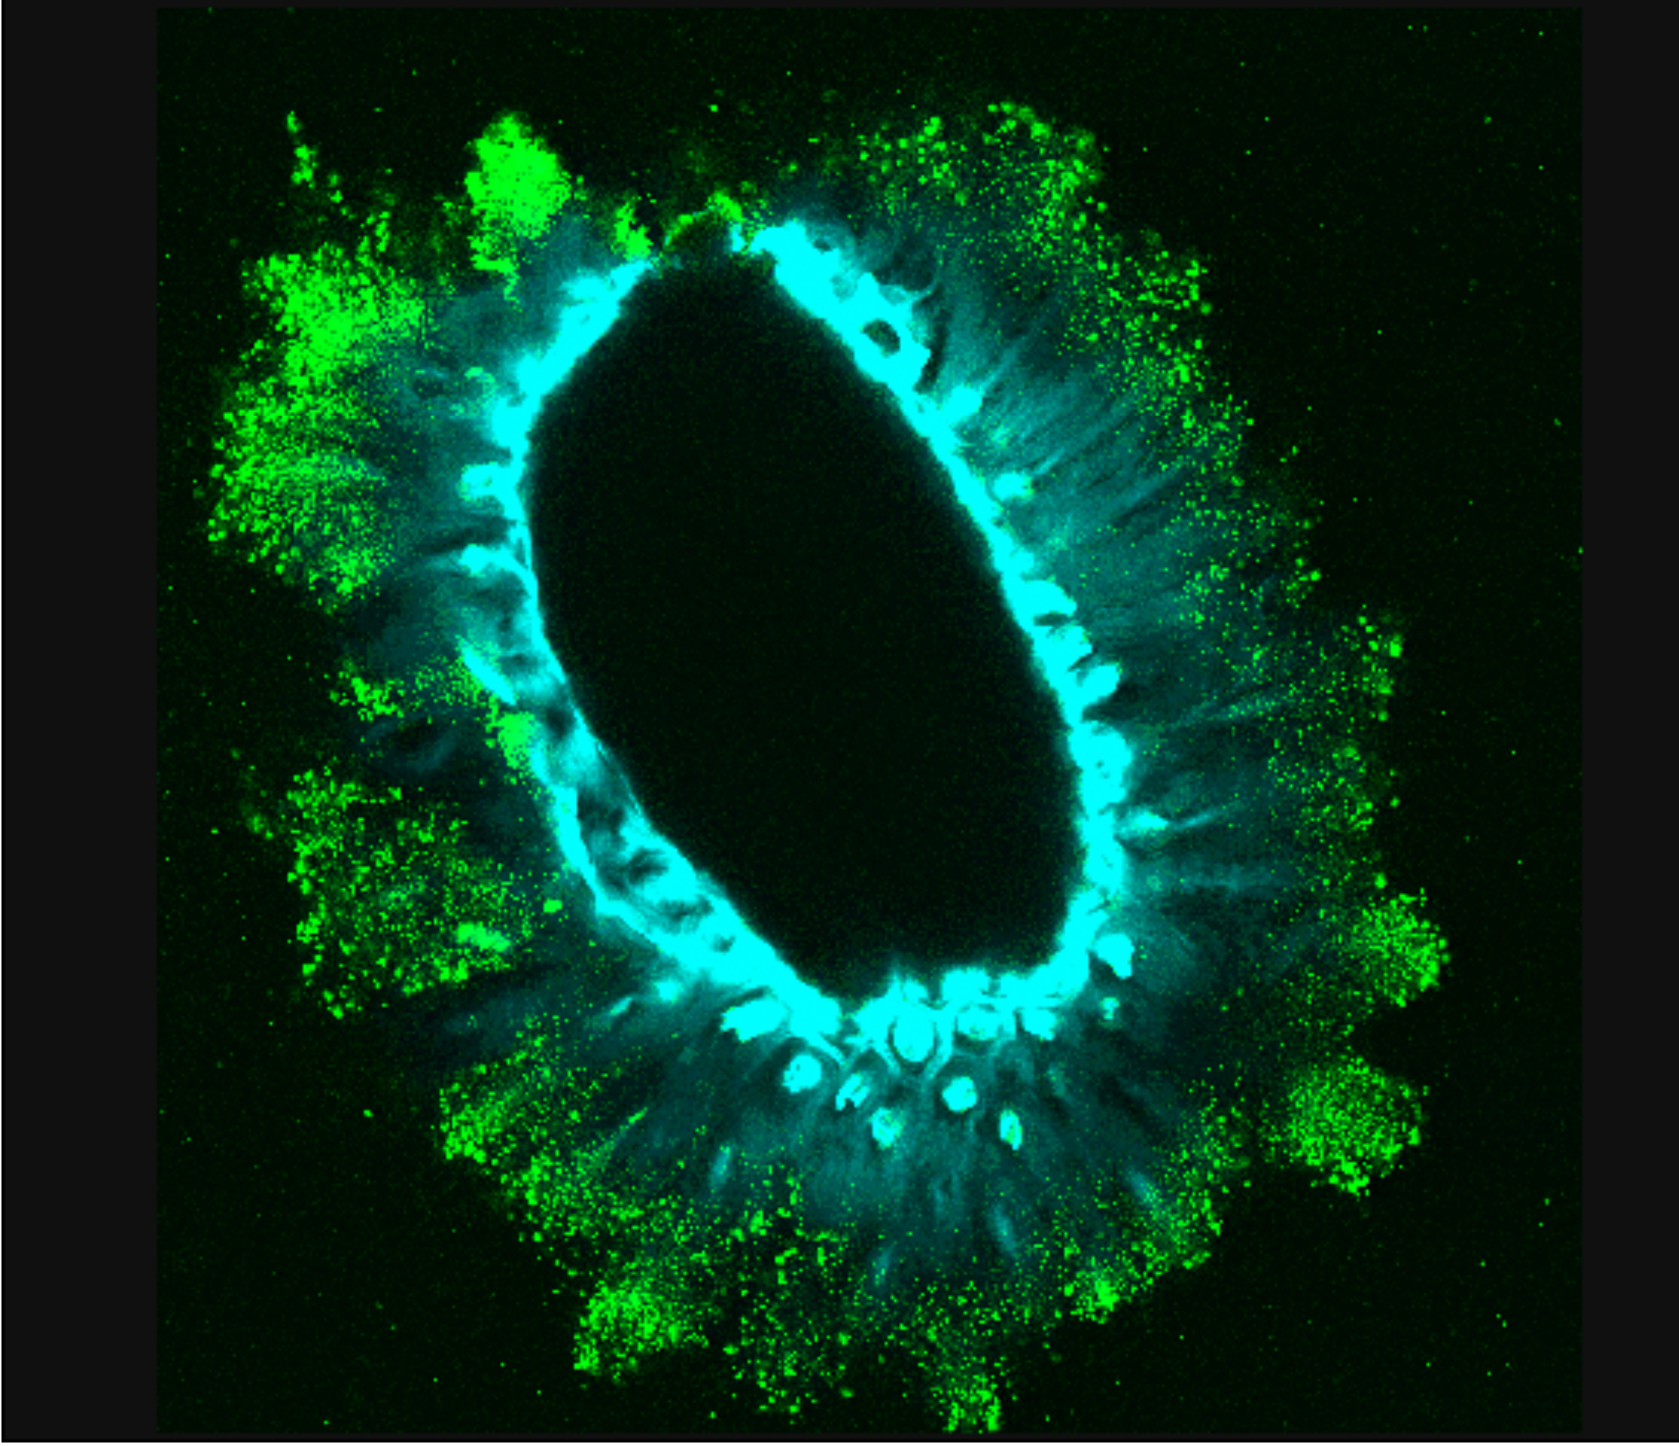 Immunolocalisation and staining of polysaccharides in Arabidopsis seed mucilage